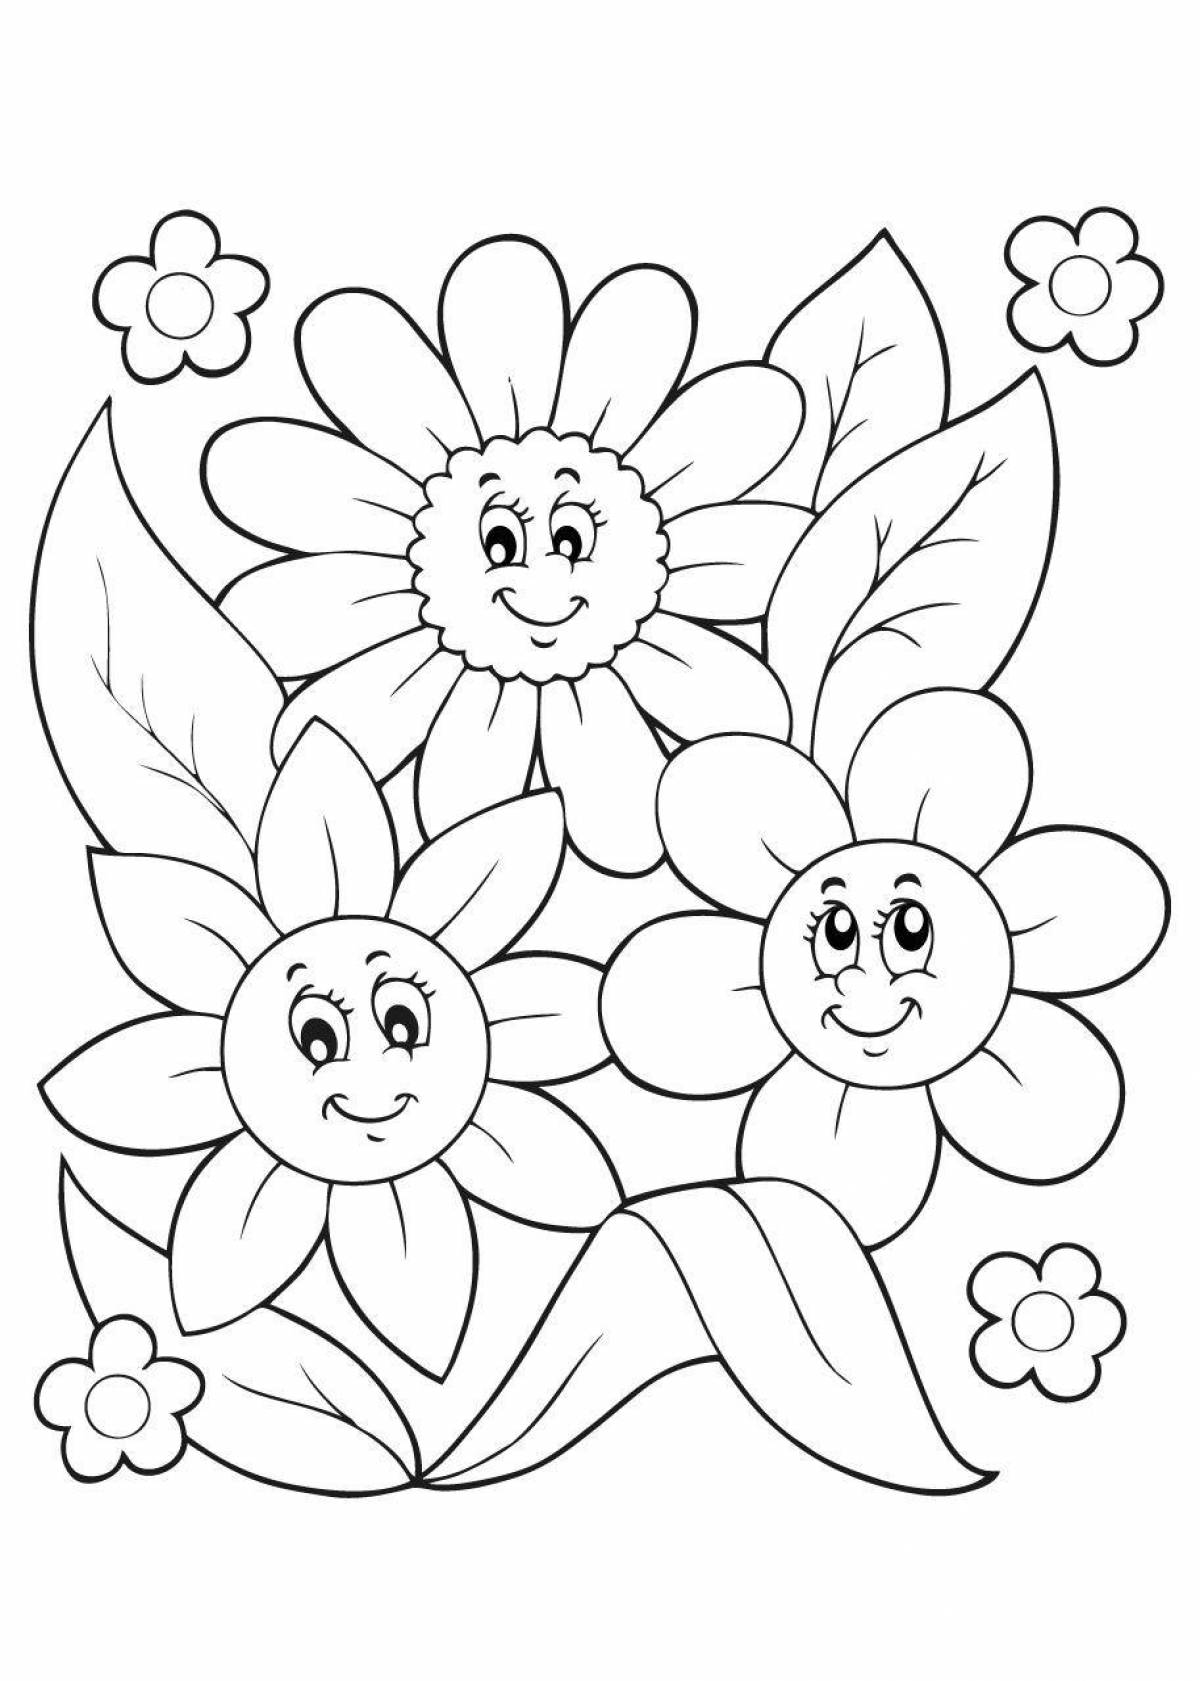 Exquisite coloring flower for children 5-6 years old